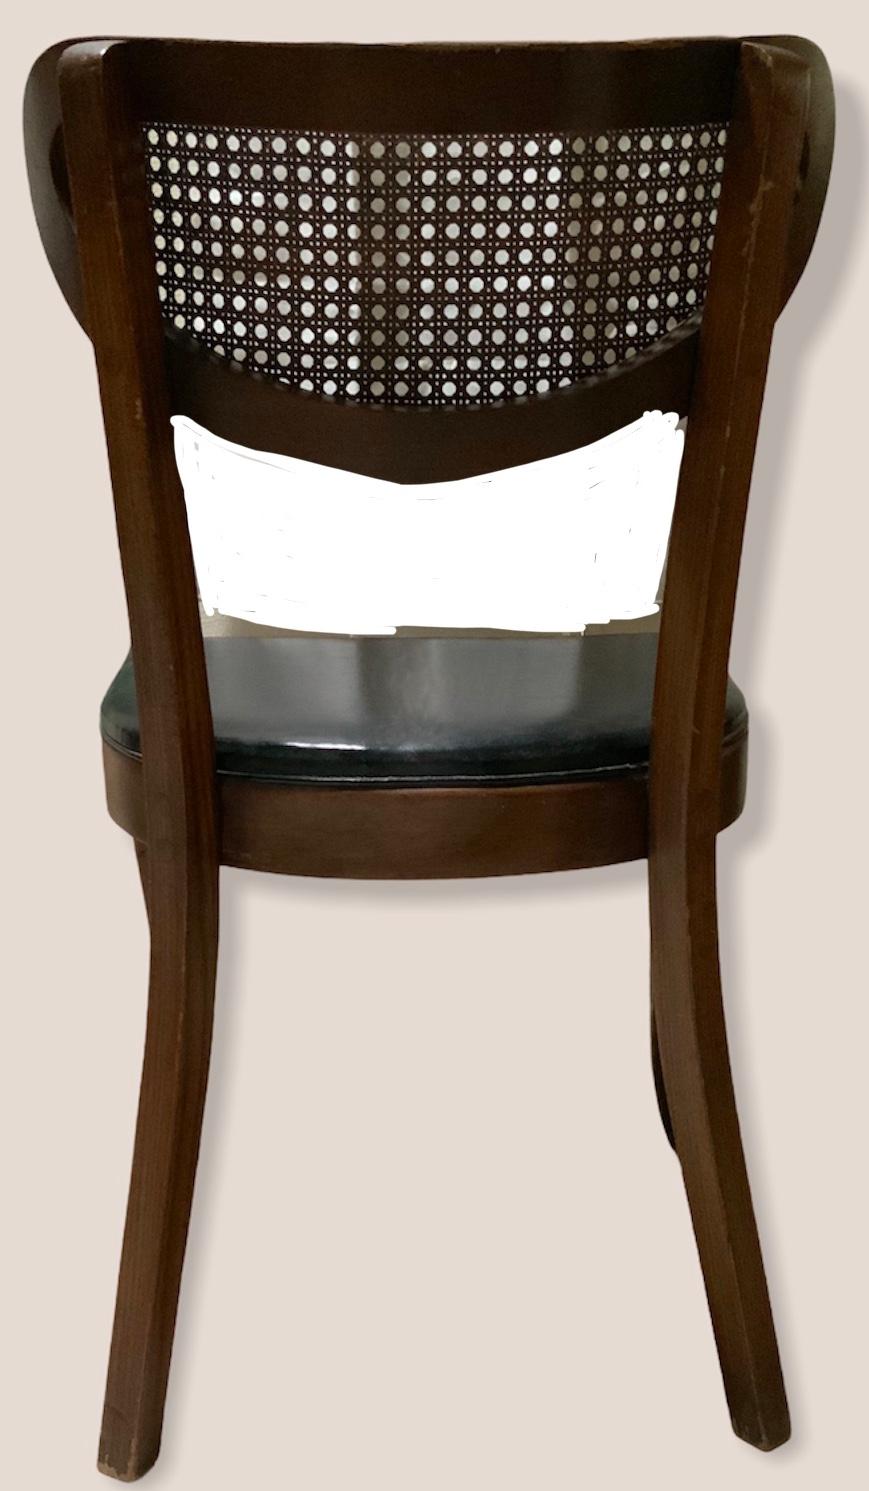 Danish Style Wood Caned Back Chair In Good Condition For Sale In Guaynabo, PR